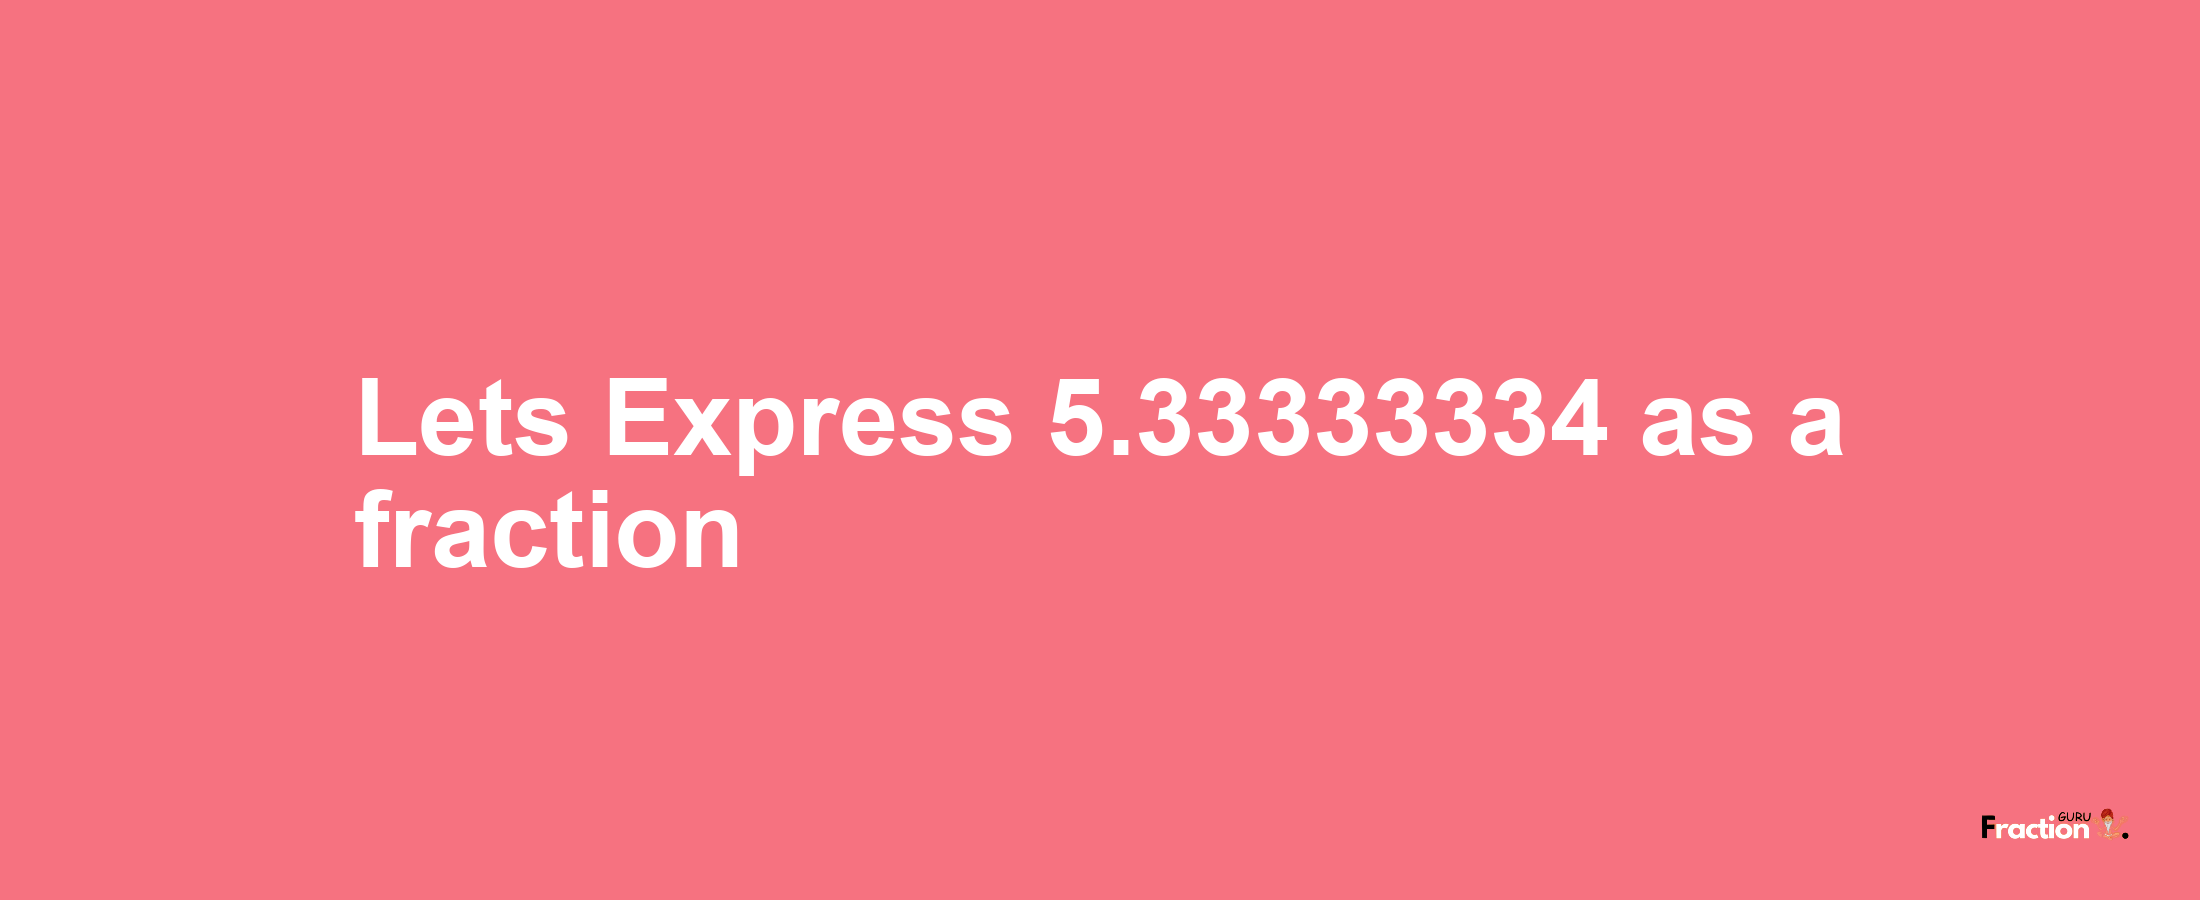 Lets Express 5.33333334 as afraction